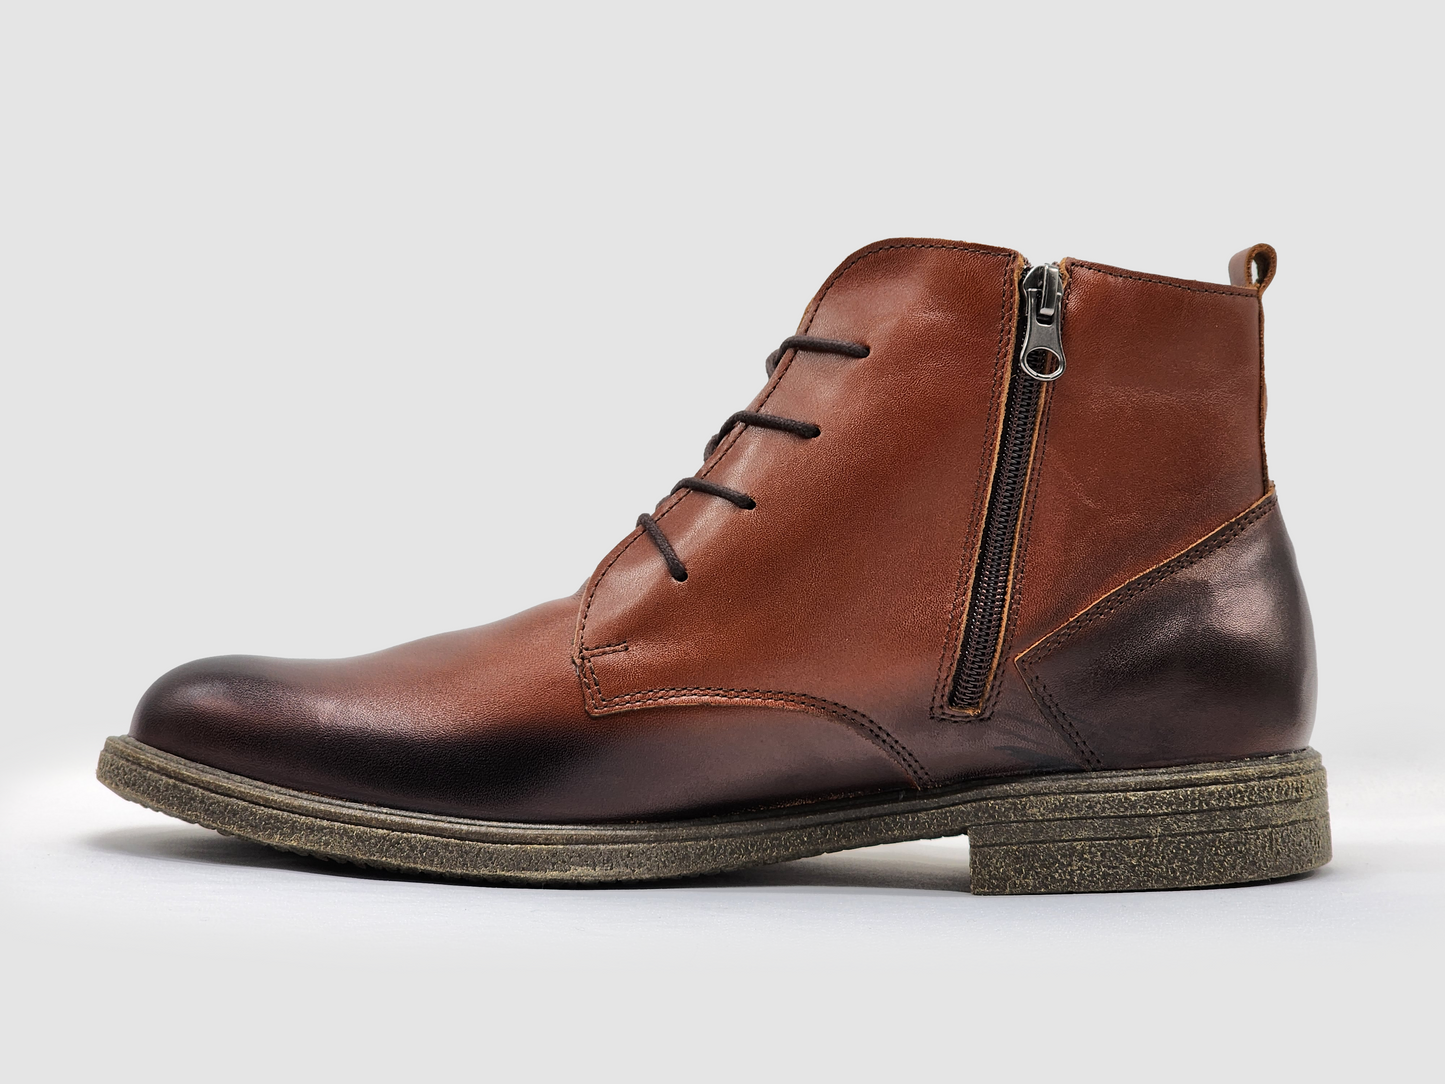 Men's Chukka Brown Zip-Up Leather Boots - Kacper Global Shoes 